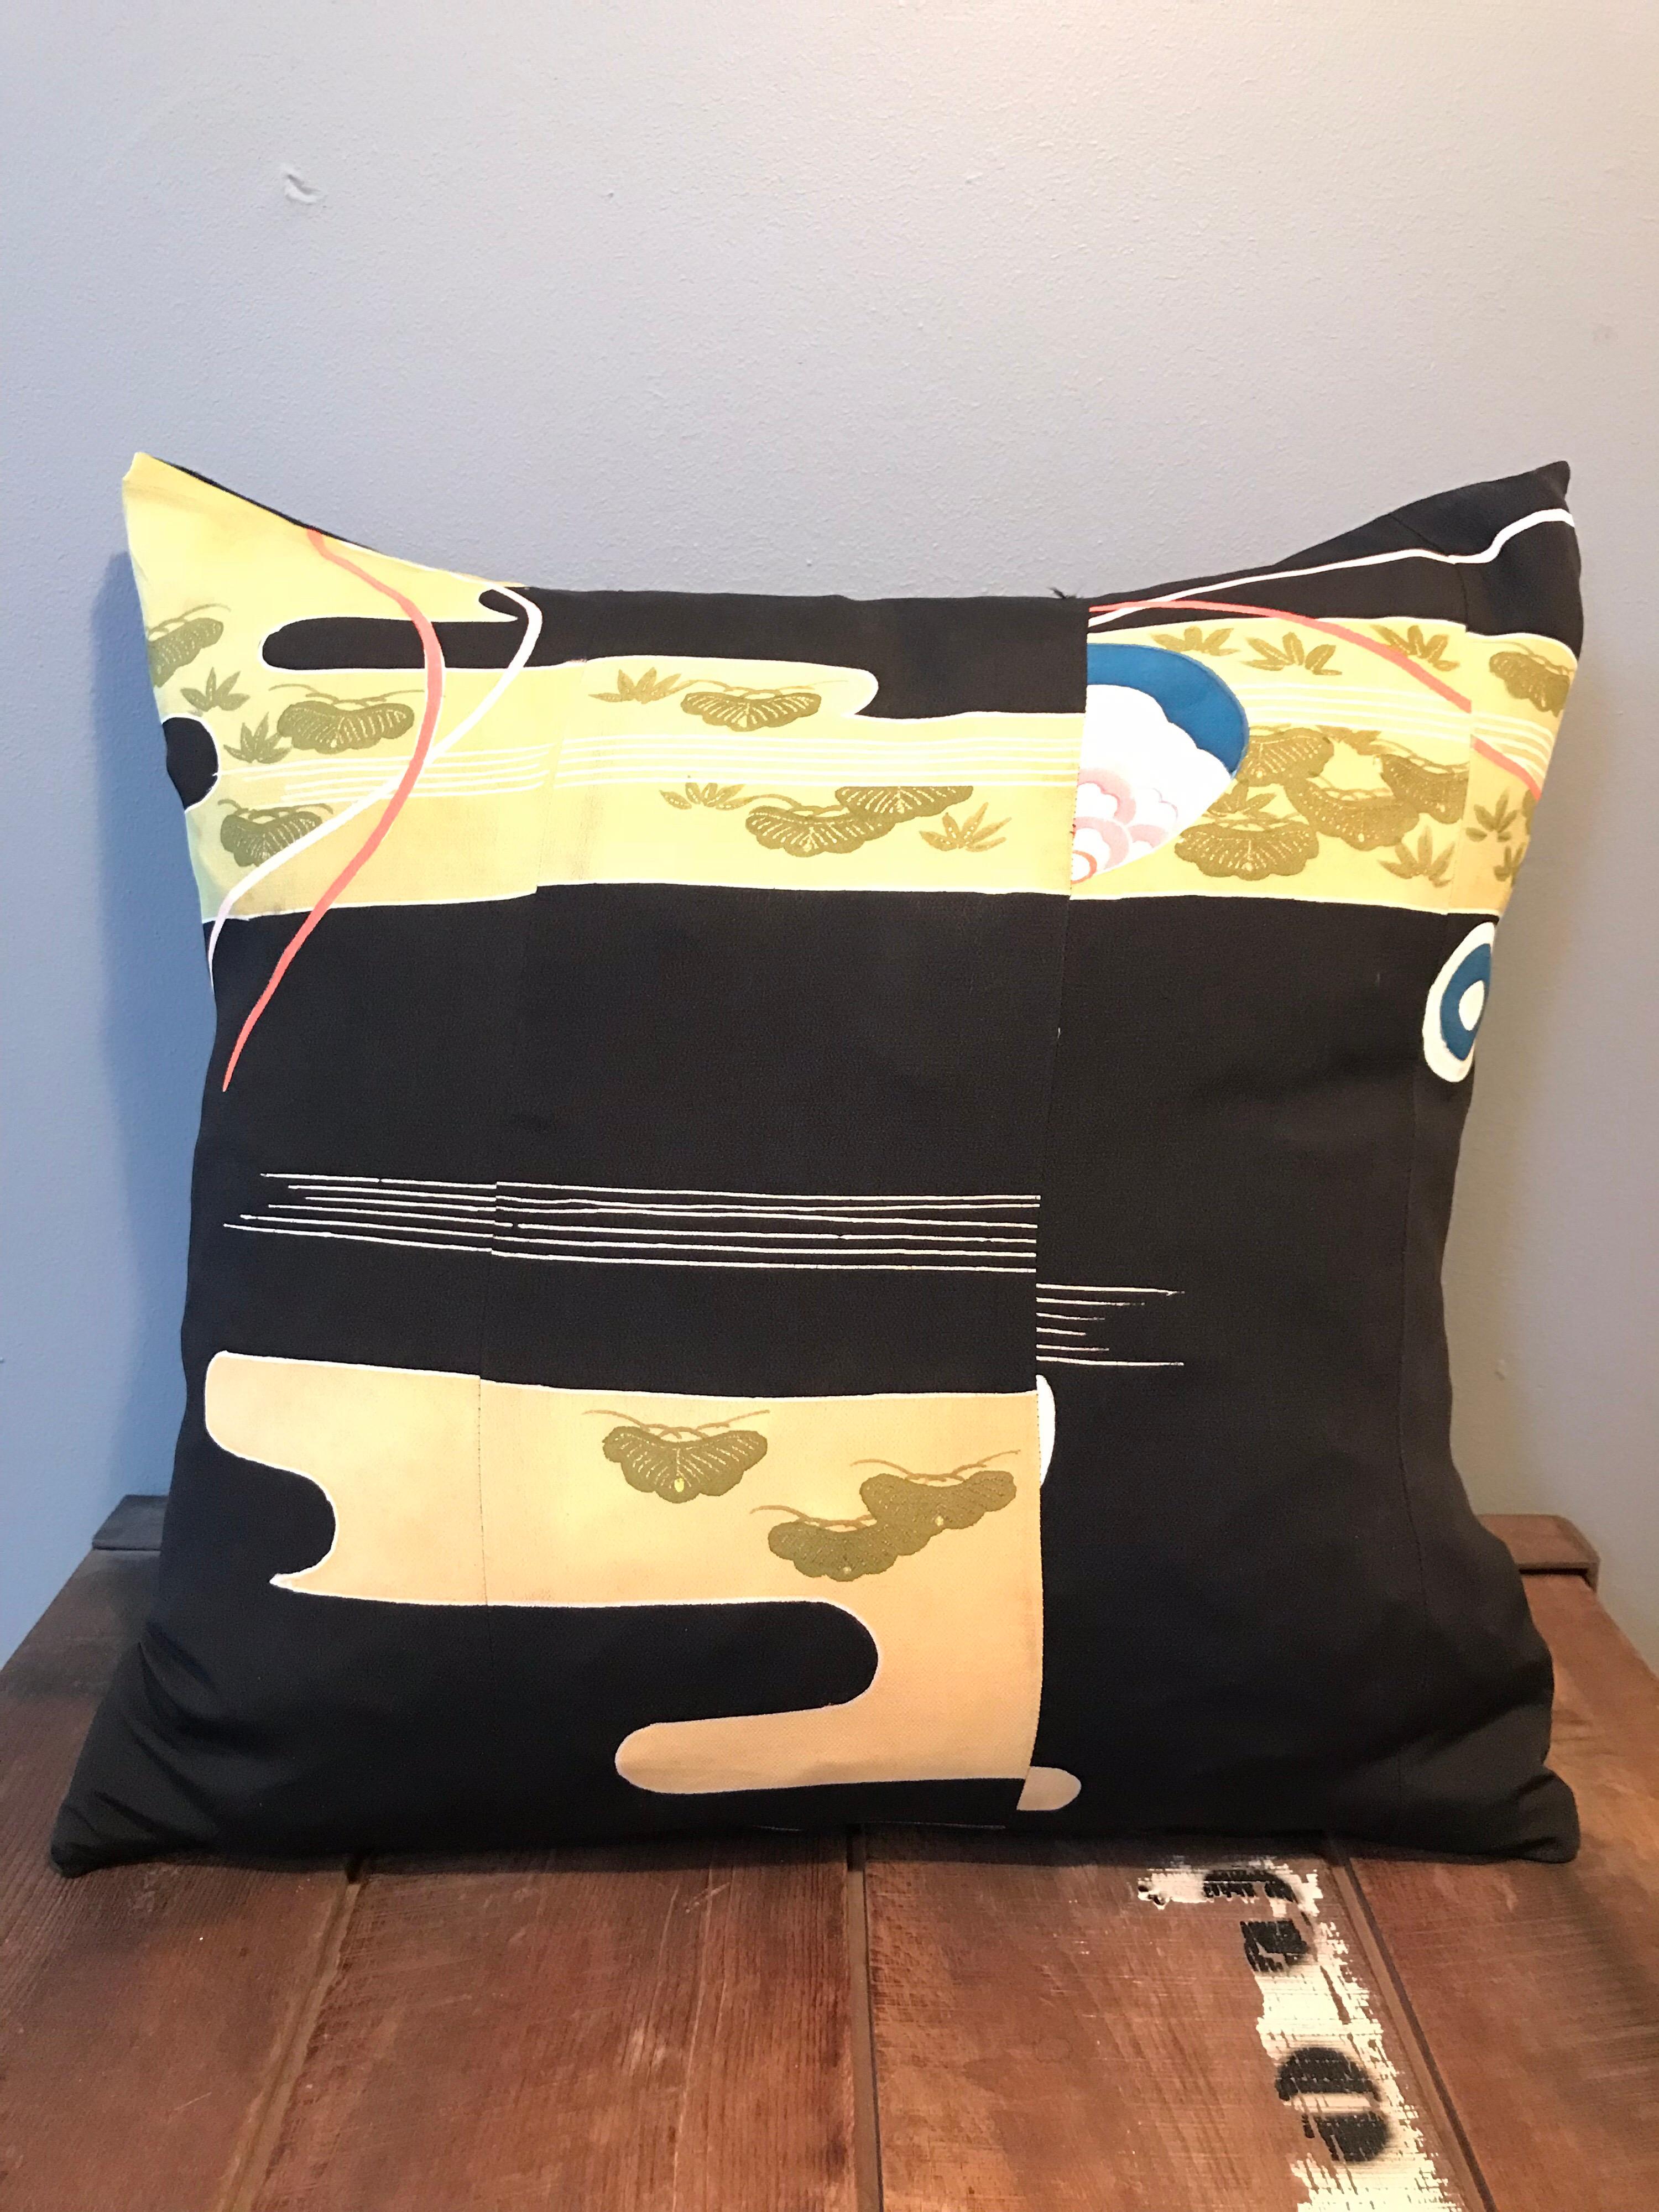 Beautiful and unique pair of vintage silk cushions made from a Japanese wedding Kimono.
Each set is unique and made from hand picked kimonos.
This pair has lovely traditional printed wedding patterns and with feather filling.
Measurements are 45